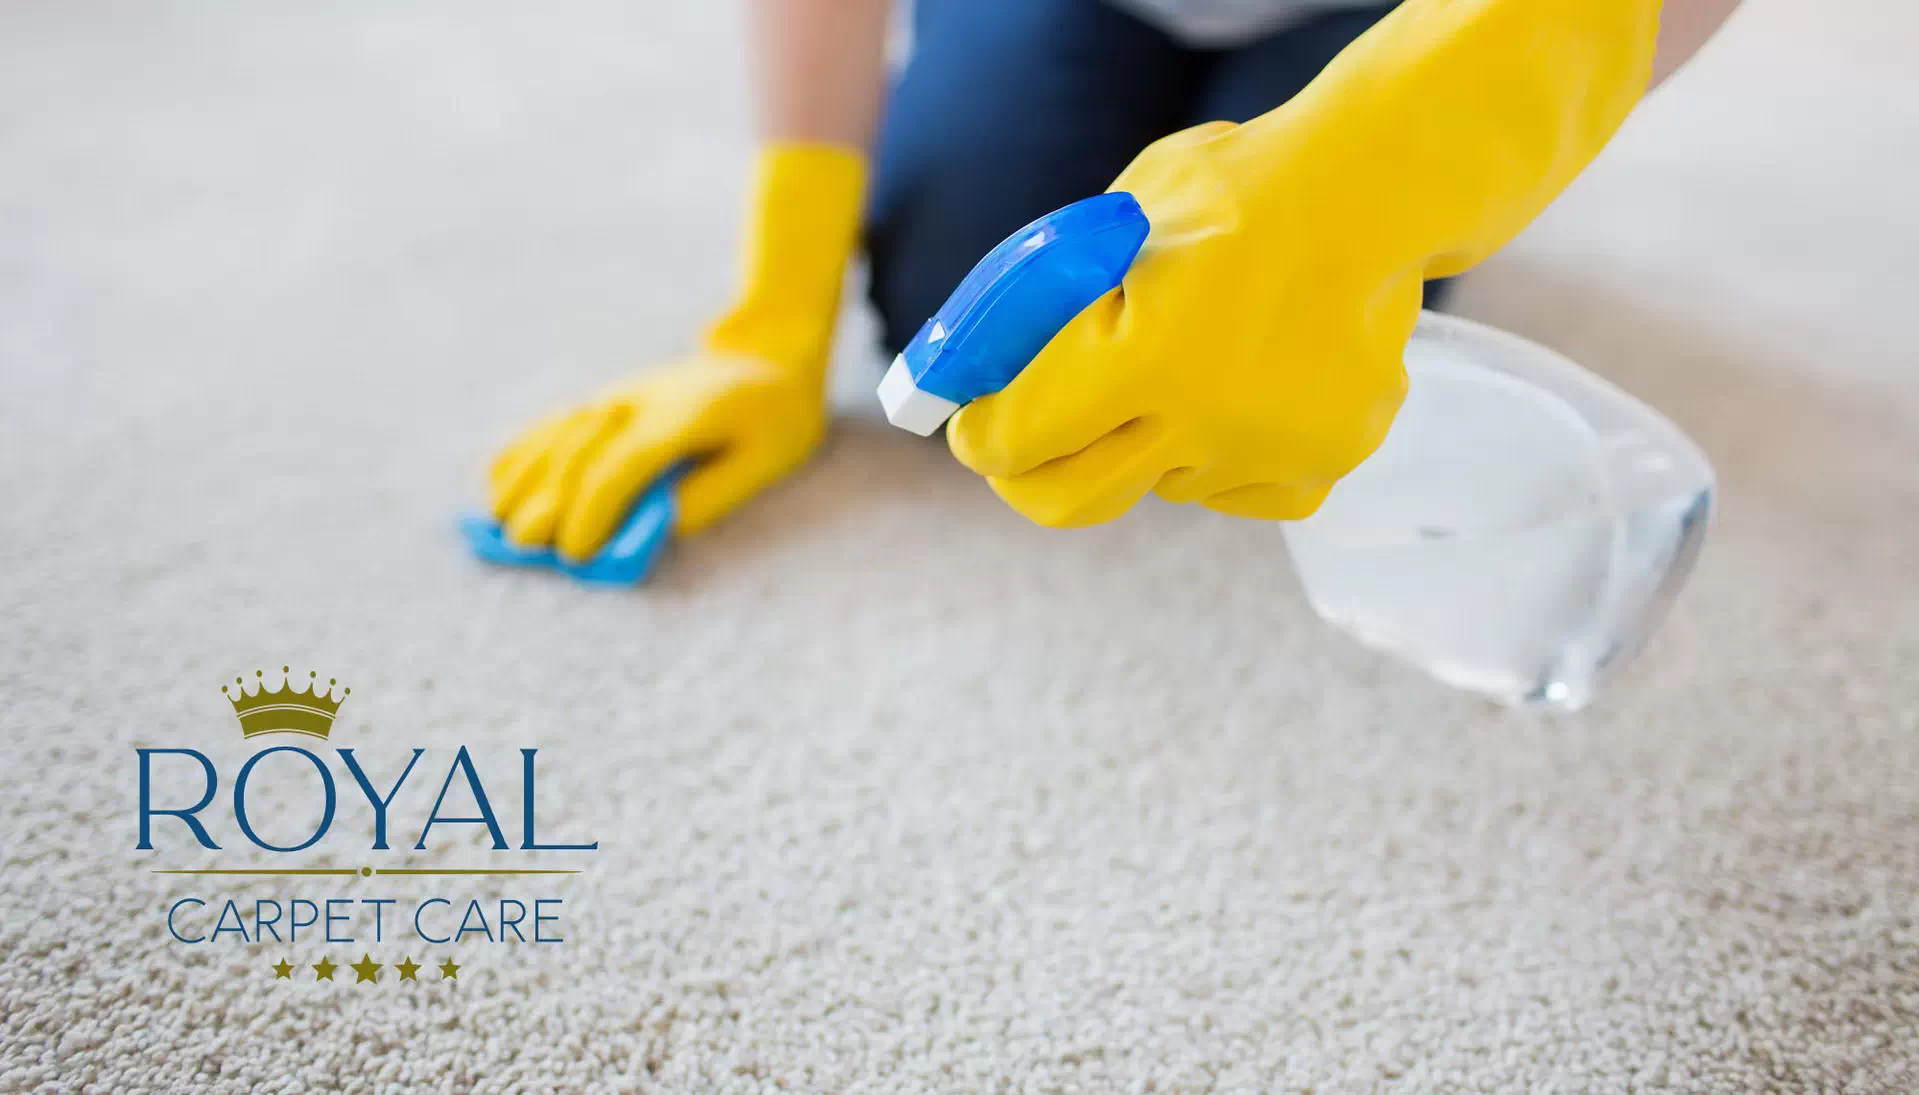 Carpet Cleaning Services In Wimbledon​